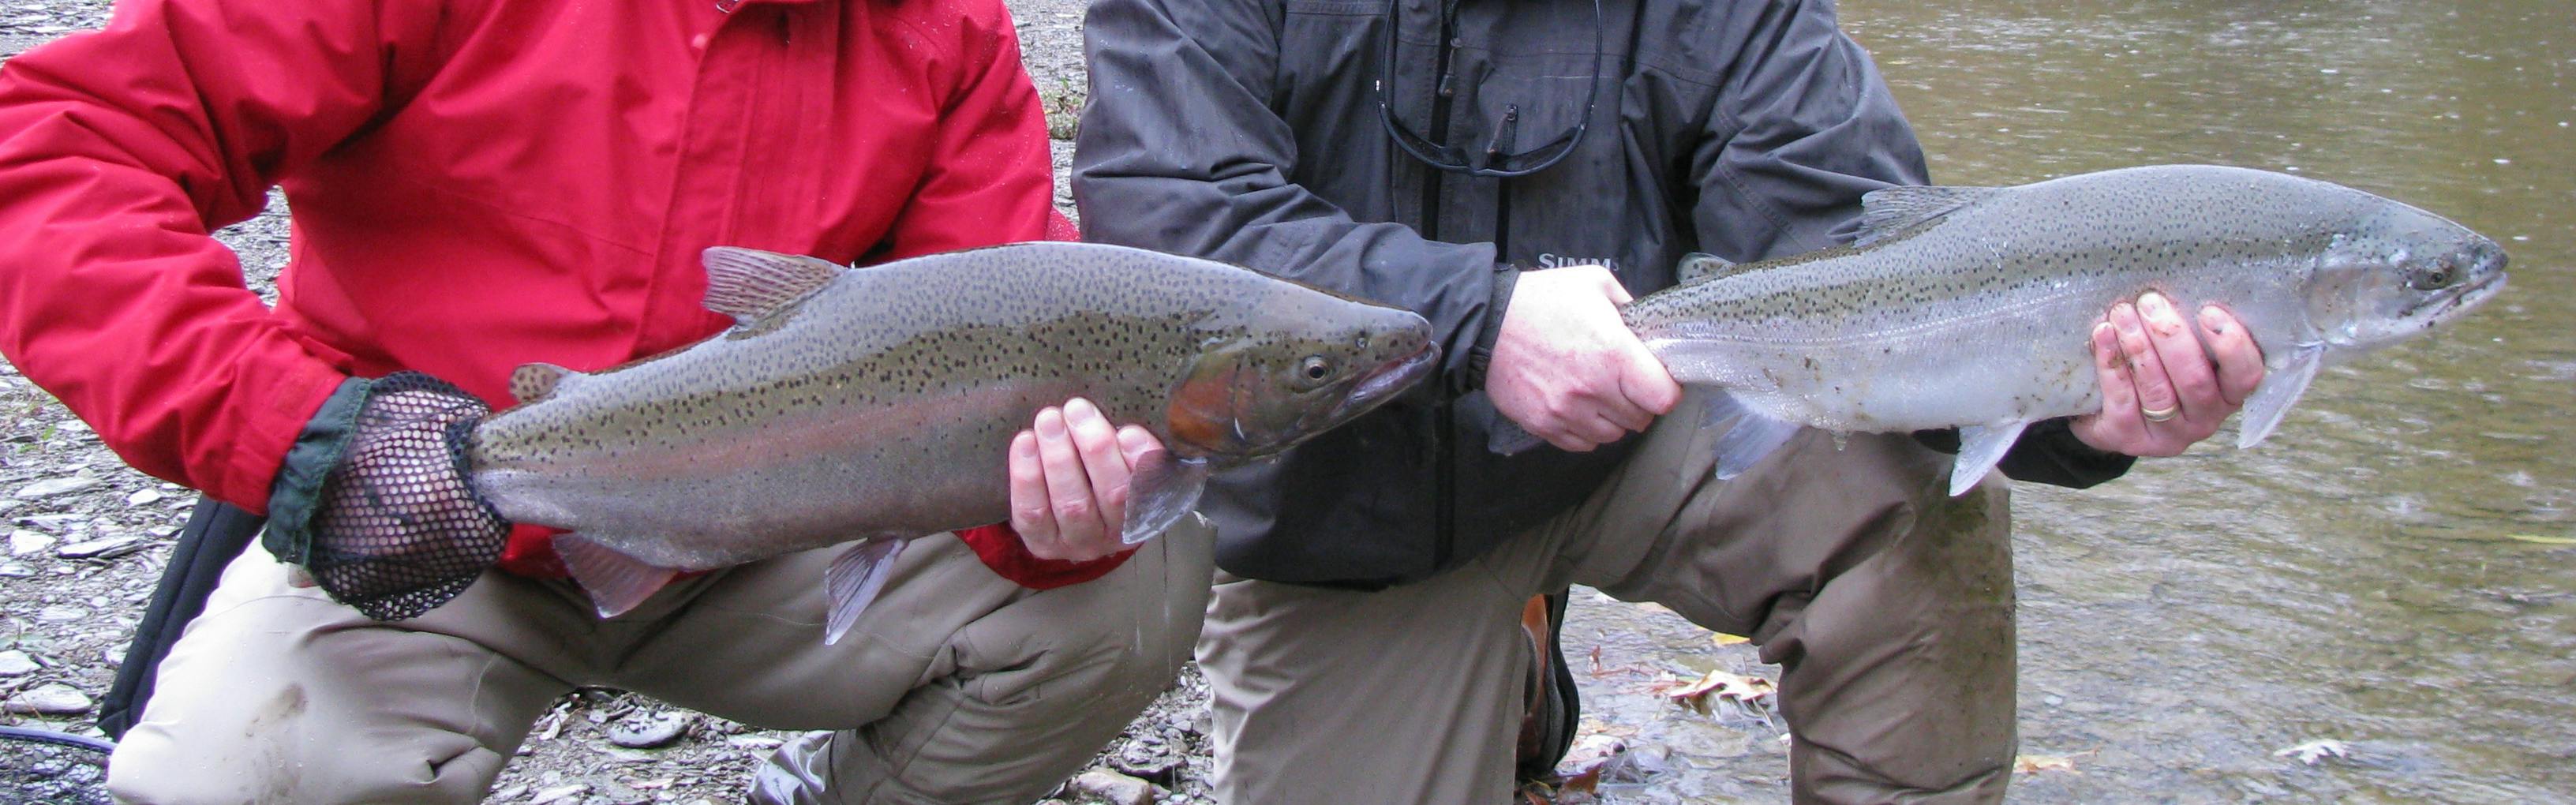 Complete Guide To Fly Fishing For Steelhead: Fly Rigs, Go-To Flies